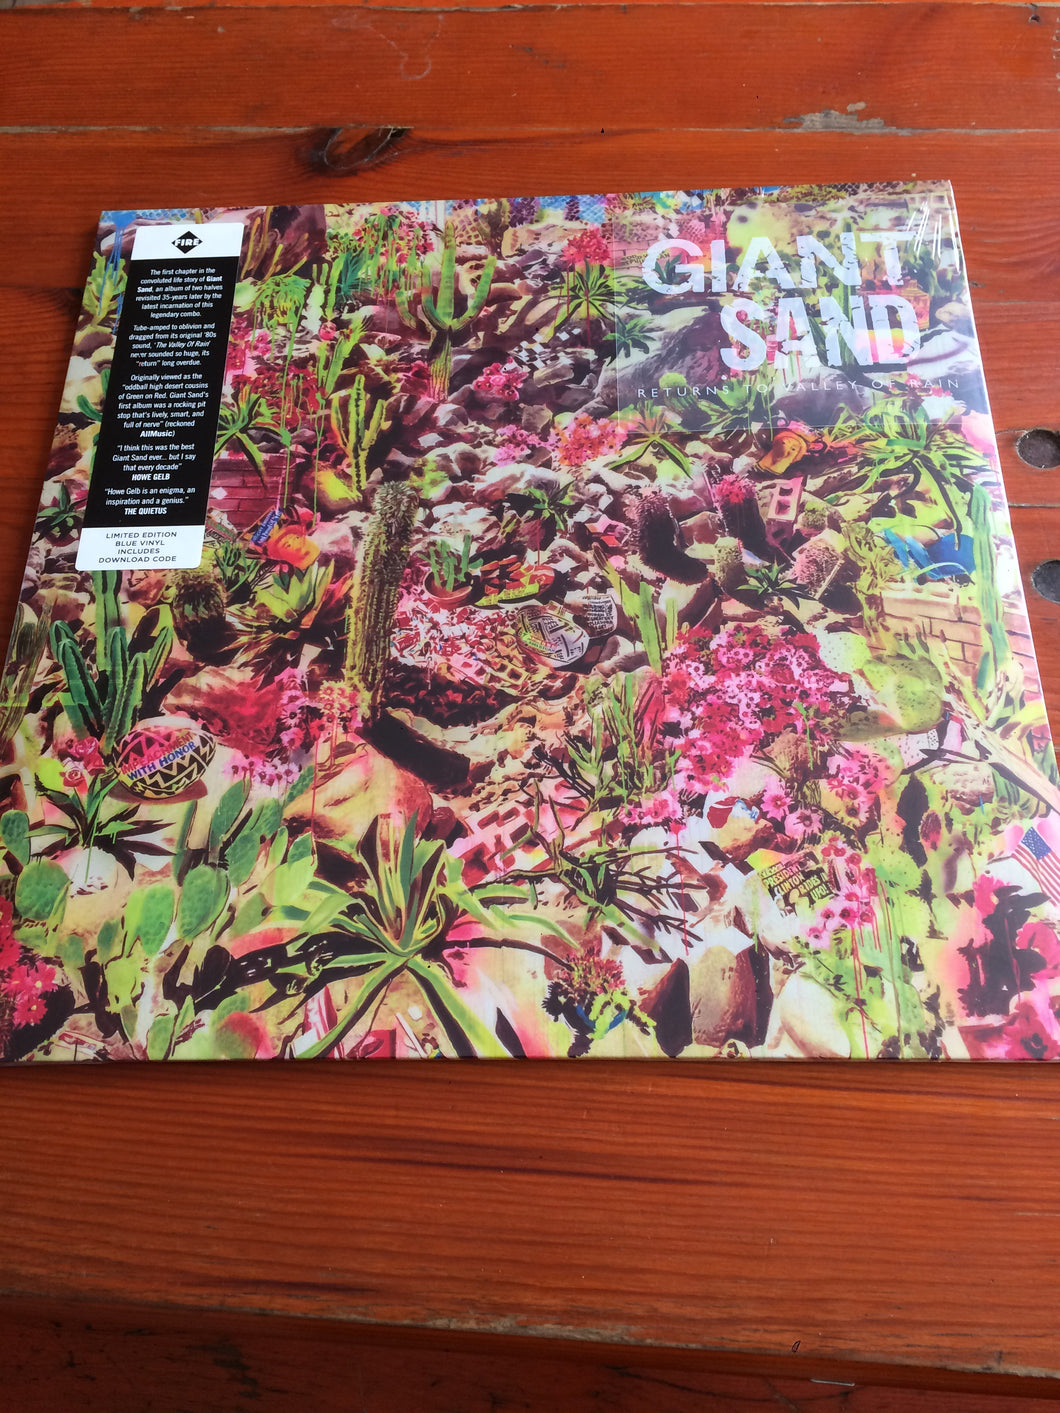 Giant Sand - Returns To Valley Of Rain